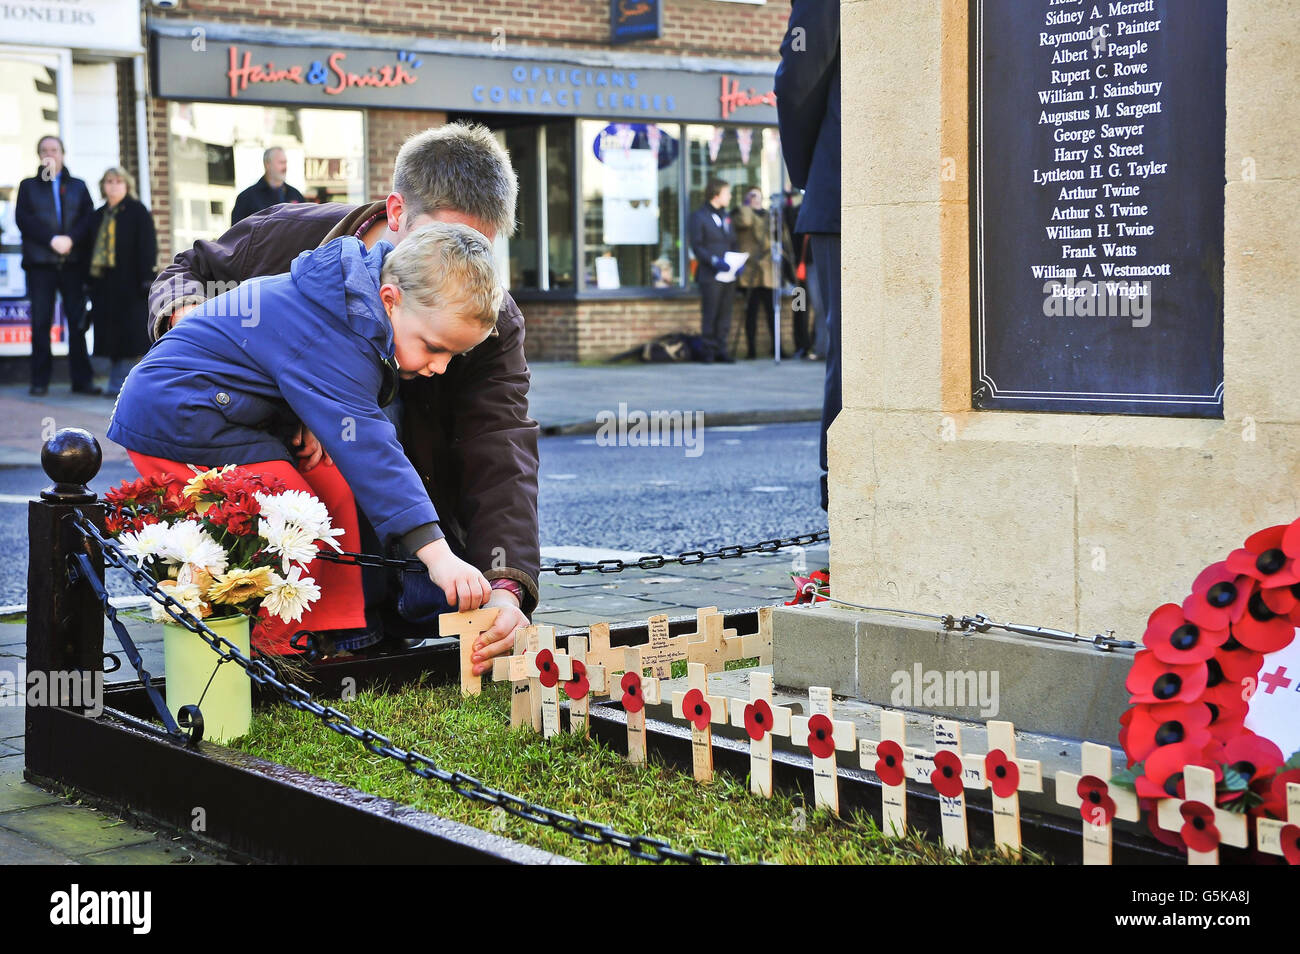 People young and old place crosses of remembrance on the war memorial on the High Street of Royal Wootton Bassett, where a service of remembrance and two minutes silence is being observed in the Wiltshire town that is now synonoymous with the repatriation of fallen service personnel. Stock Photo